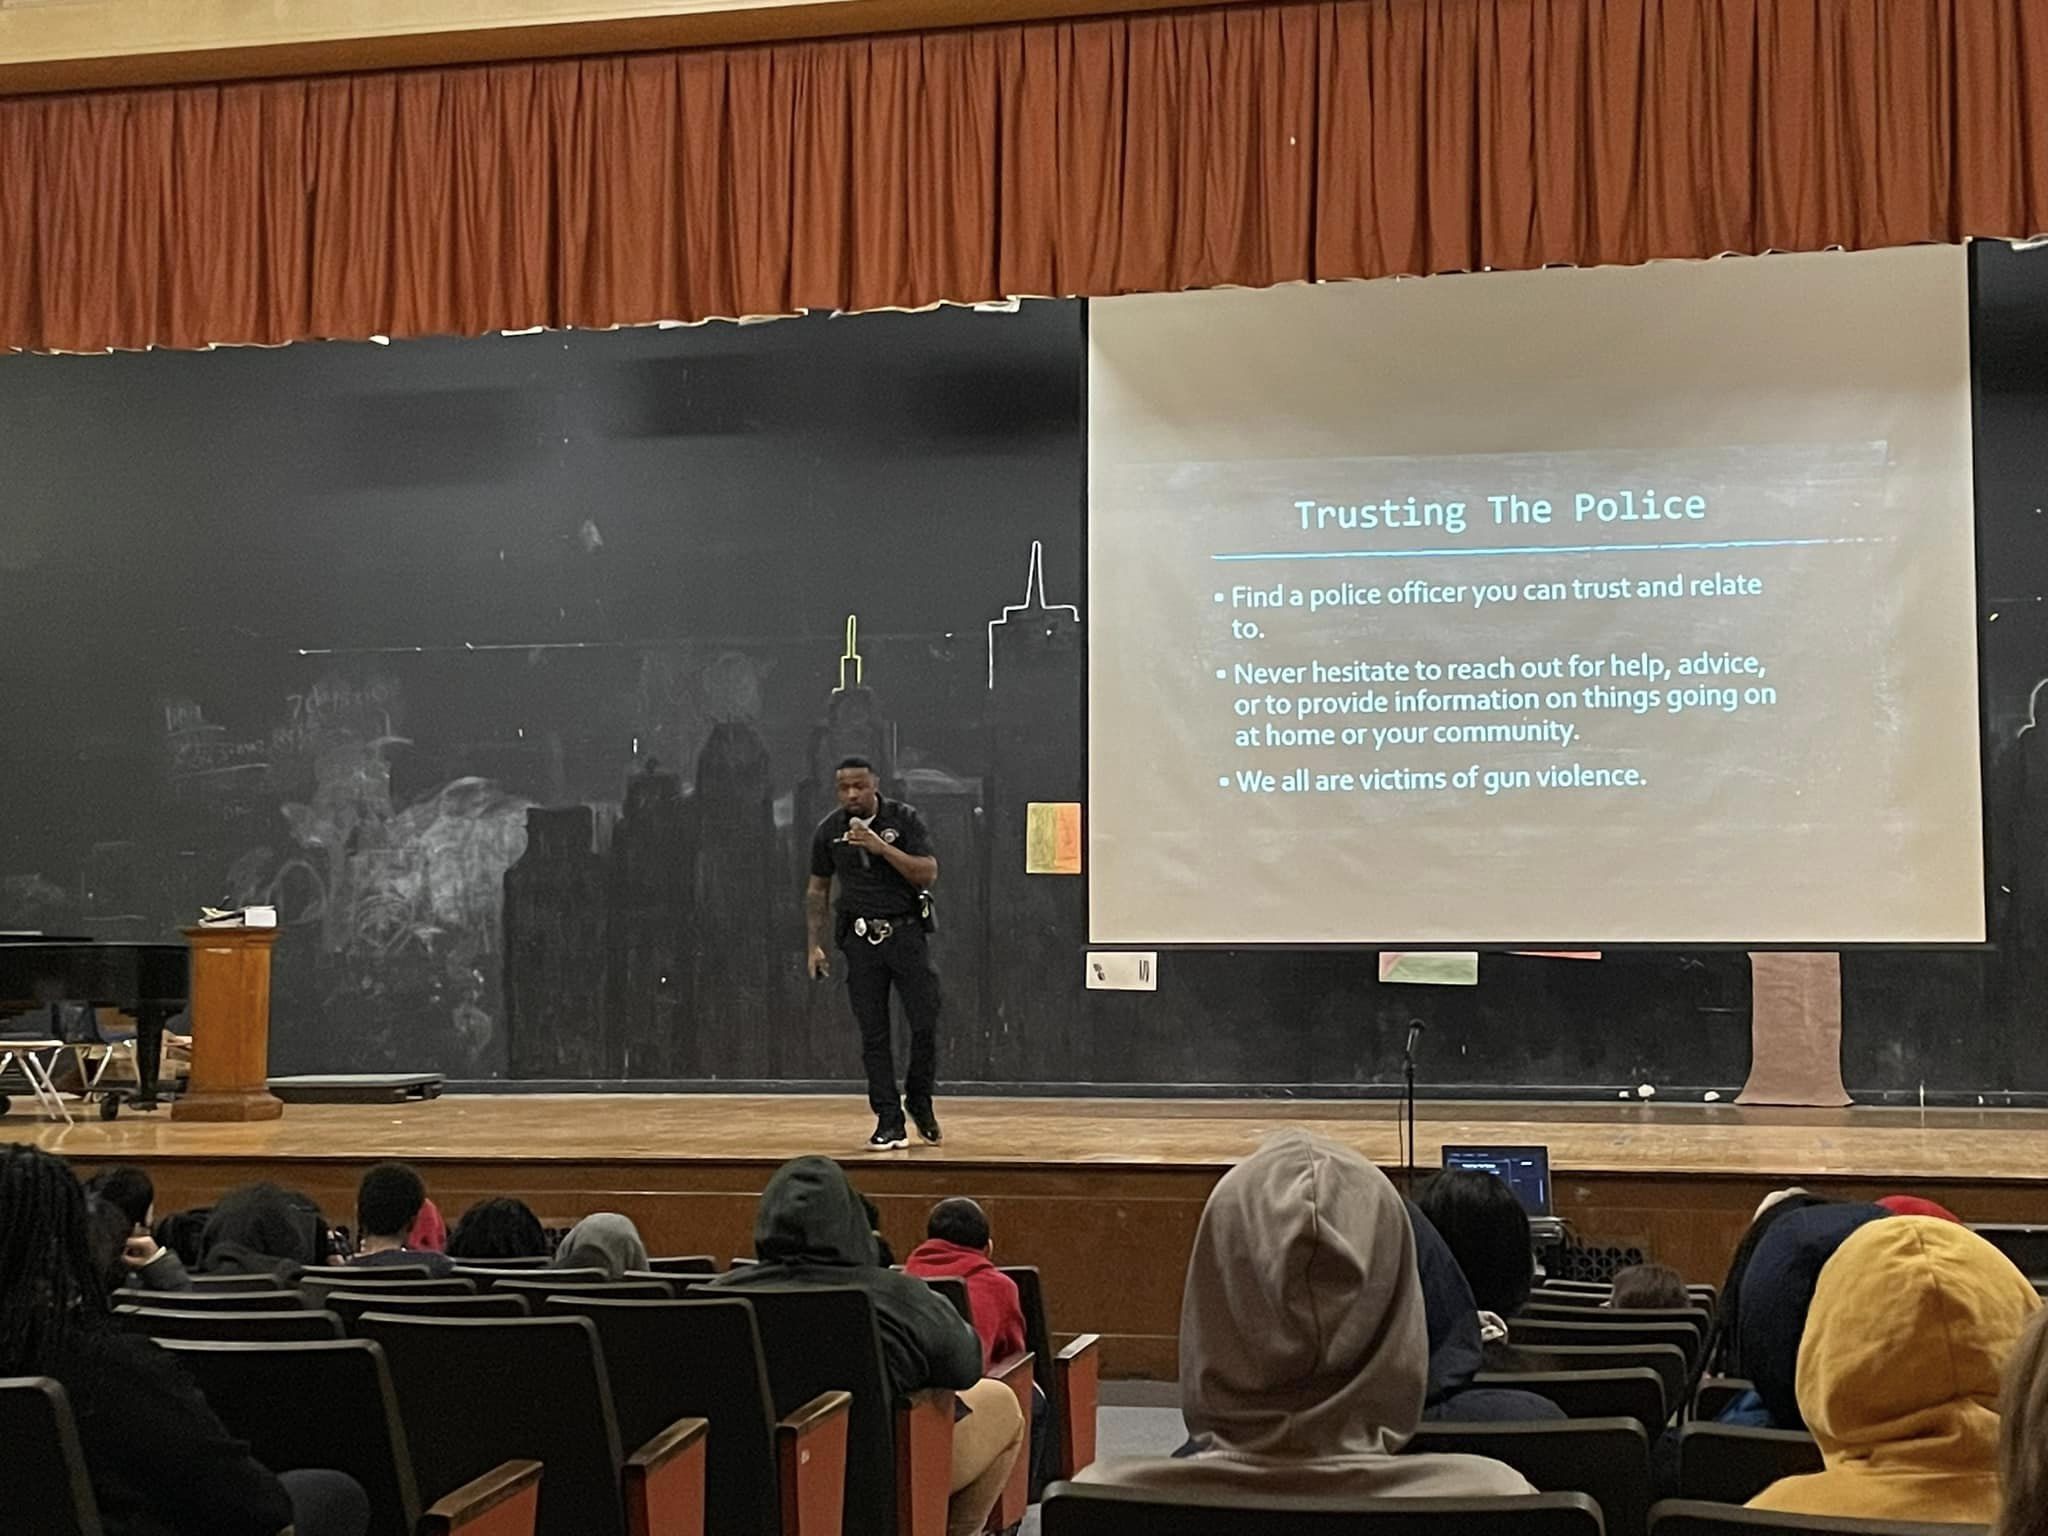 This is a photo of a police officer standing on a stage in a school auditorium speaking to students in the audience.